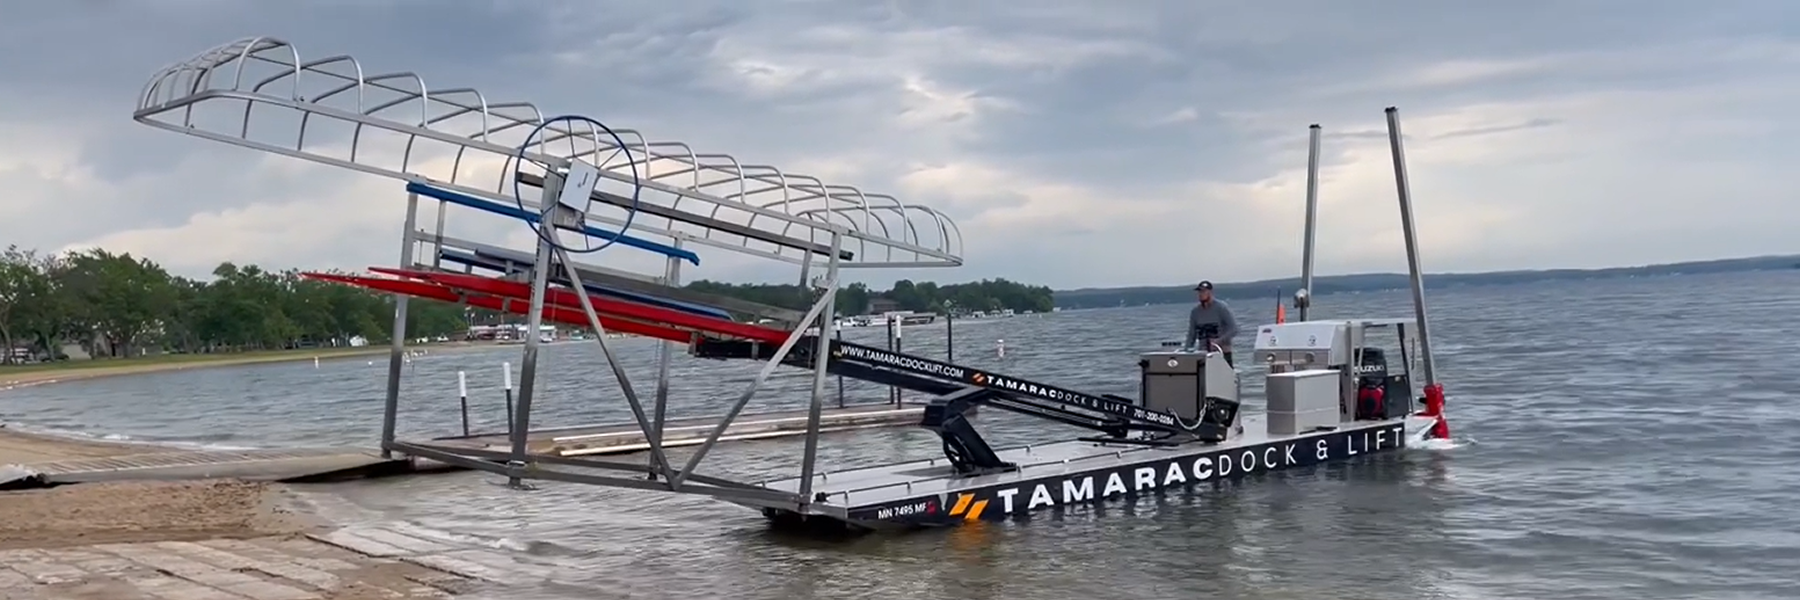 Contact Tamarac Dock and Lift for help with dock and lift installation or to buy a new dock or boat lift.